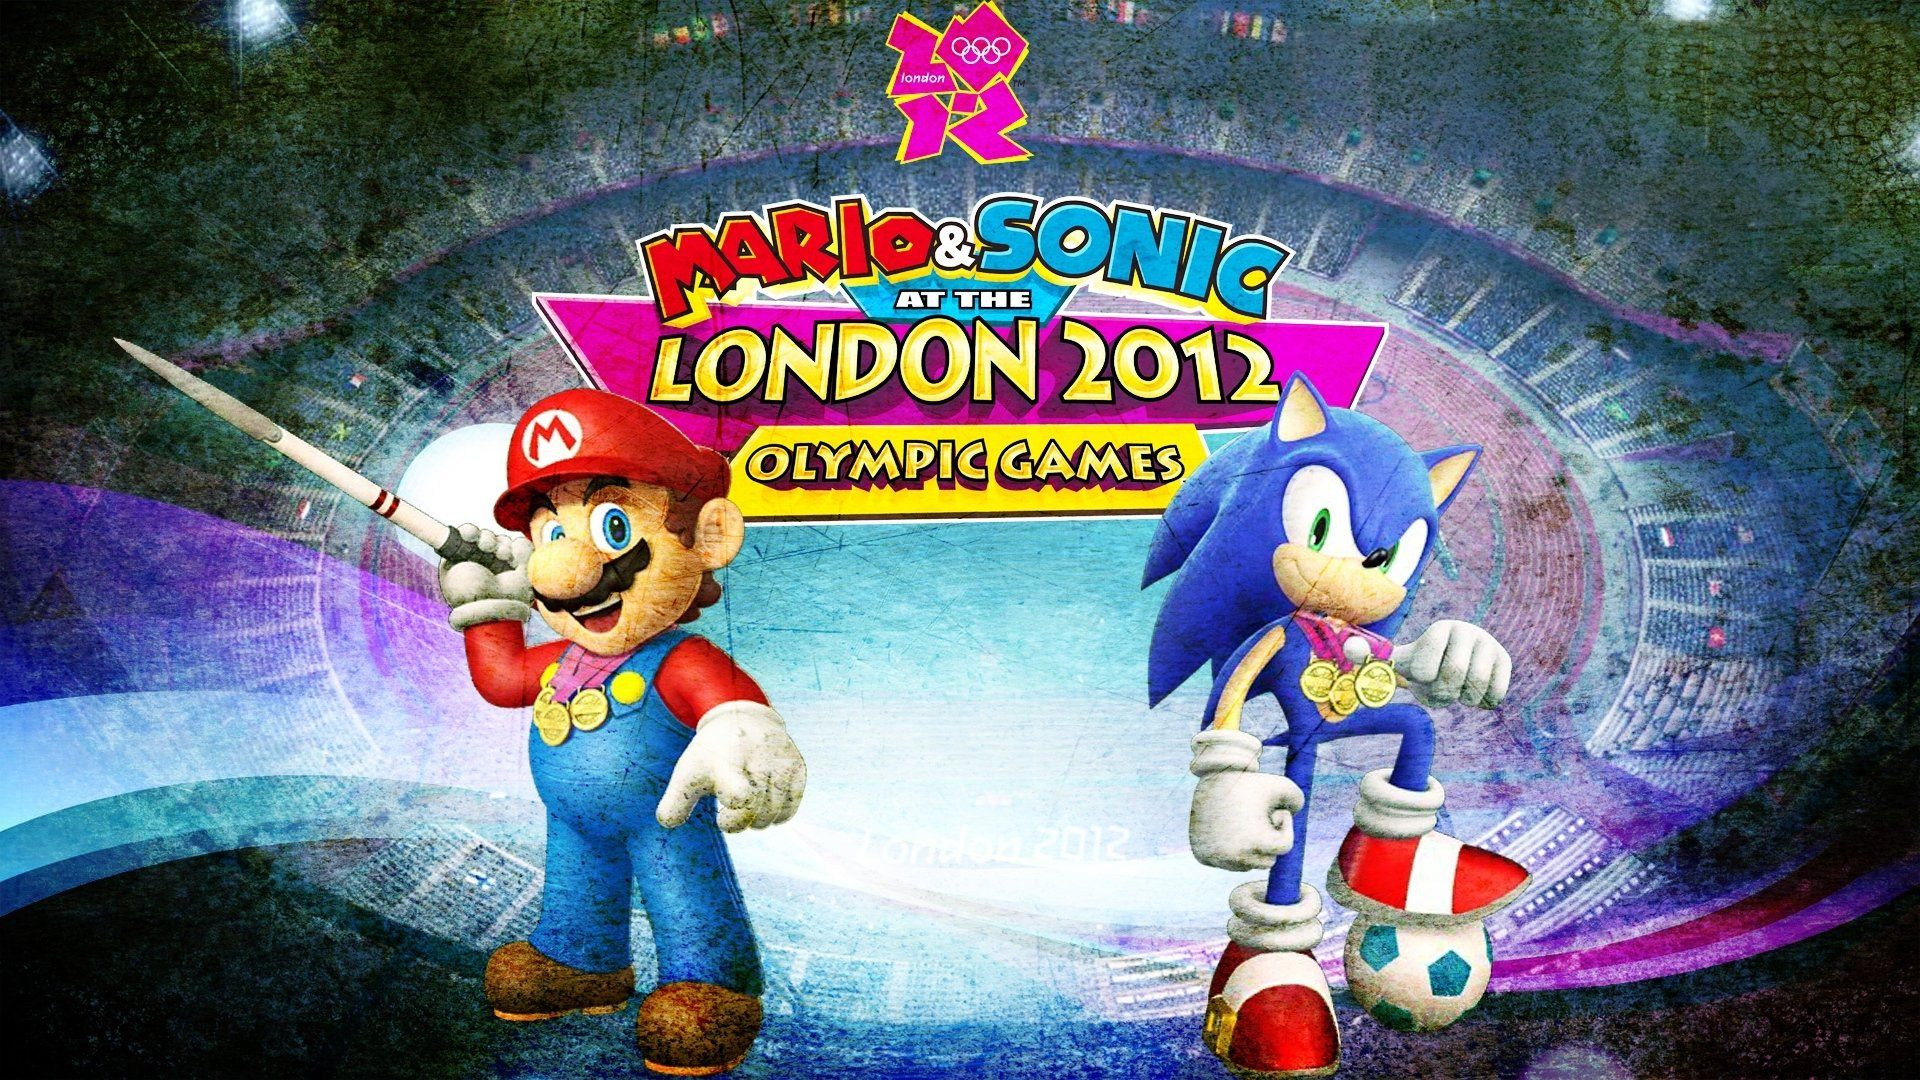 Mario & Sonic at the London 2012 Olympic Games HD Wallpaper